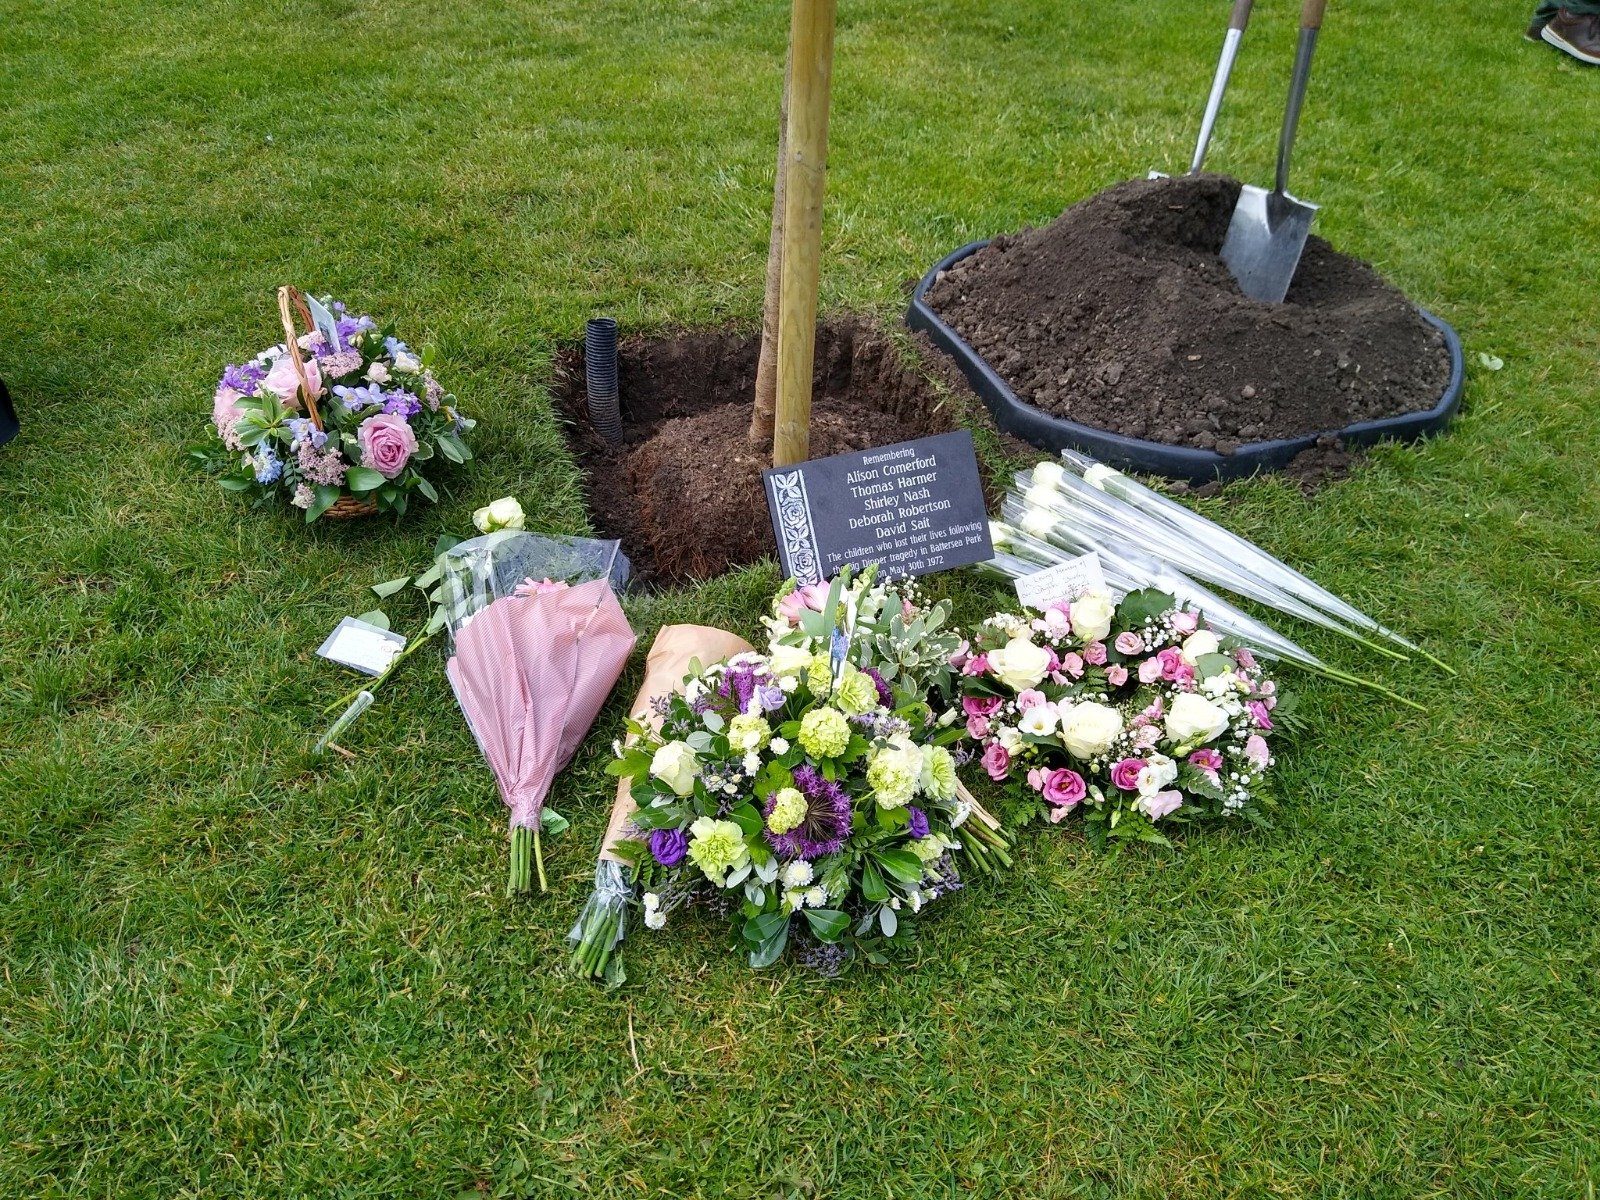 An image of flowers left at the memorial tree for the five young victims of the Battersea funfair disaster.